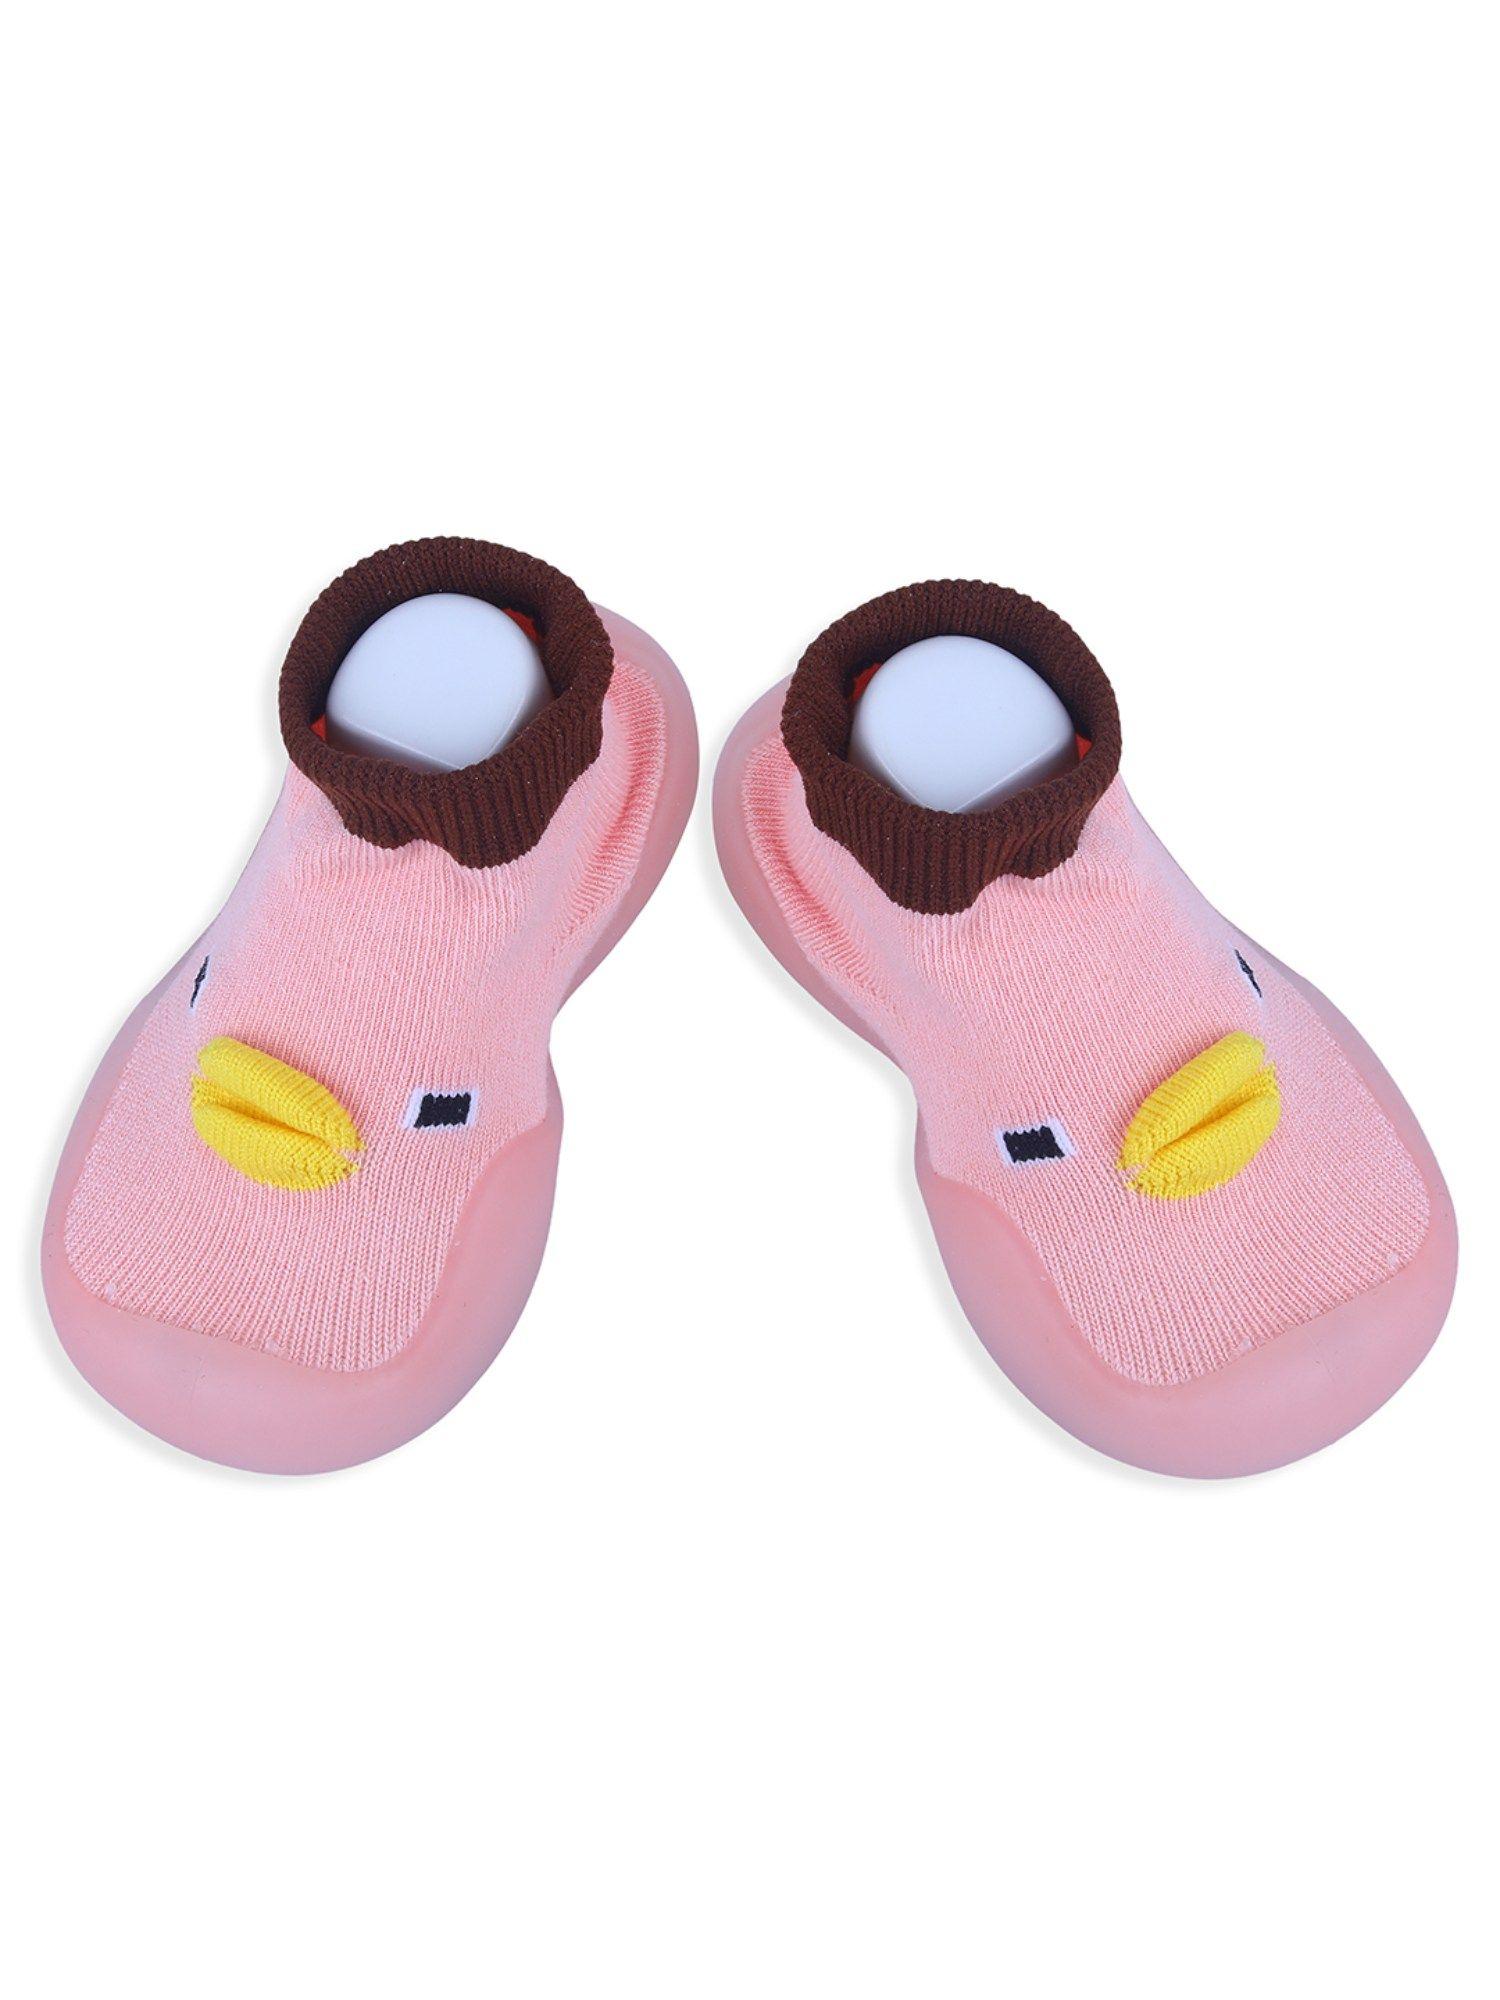 cute duck face rubber comfortable sole slip-on sock shoes - pink